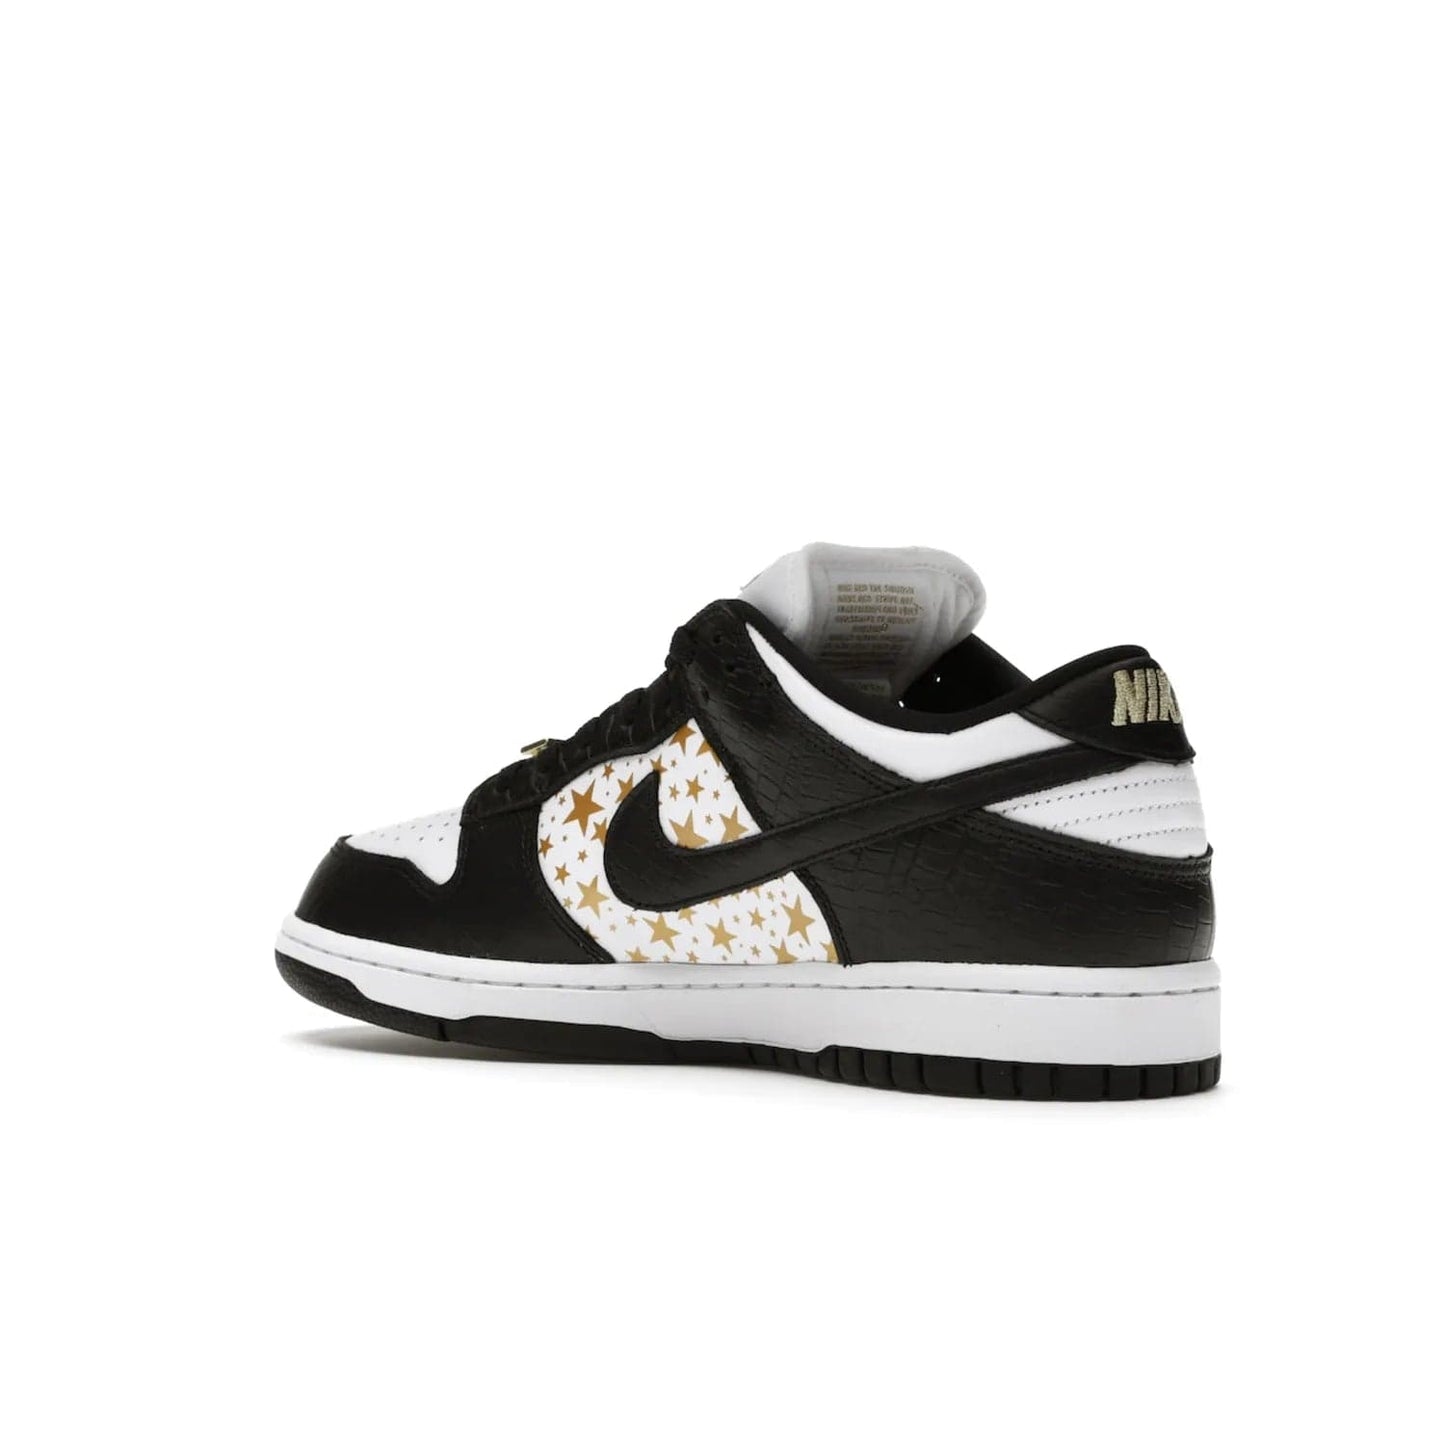 Nike SB Dunk Low Supreme Stars Black (2021) - Image 23 - Only at www.BallersClubKickz.com - Retro style and signature details make the Nike SB Dunk Low Supreme Black a must-have. This special edition shoe features a white leather upper and black croc skin overlays complemented by gold stars and deubré. Enjoy a piece of SB history and grab yours today.